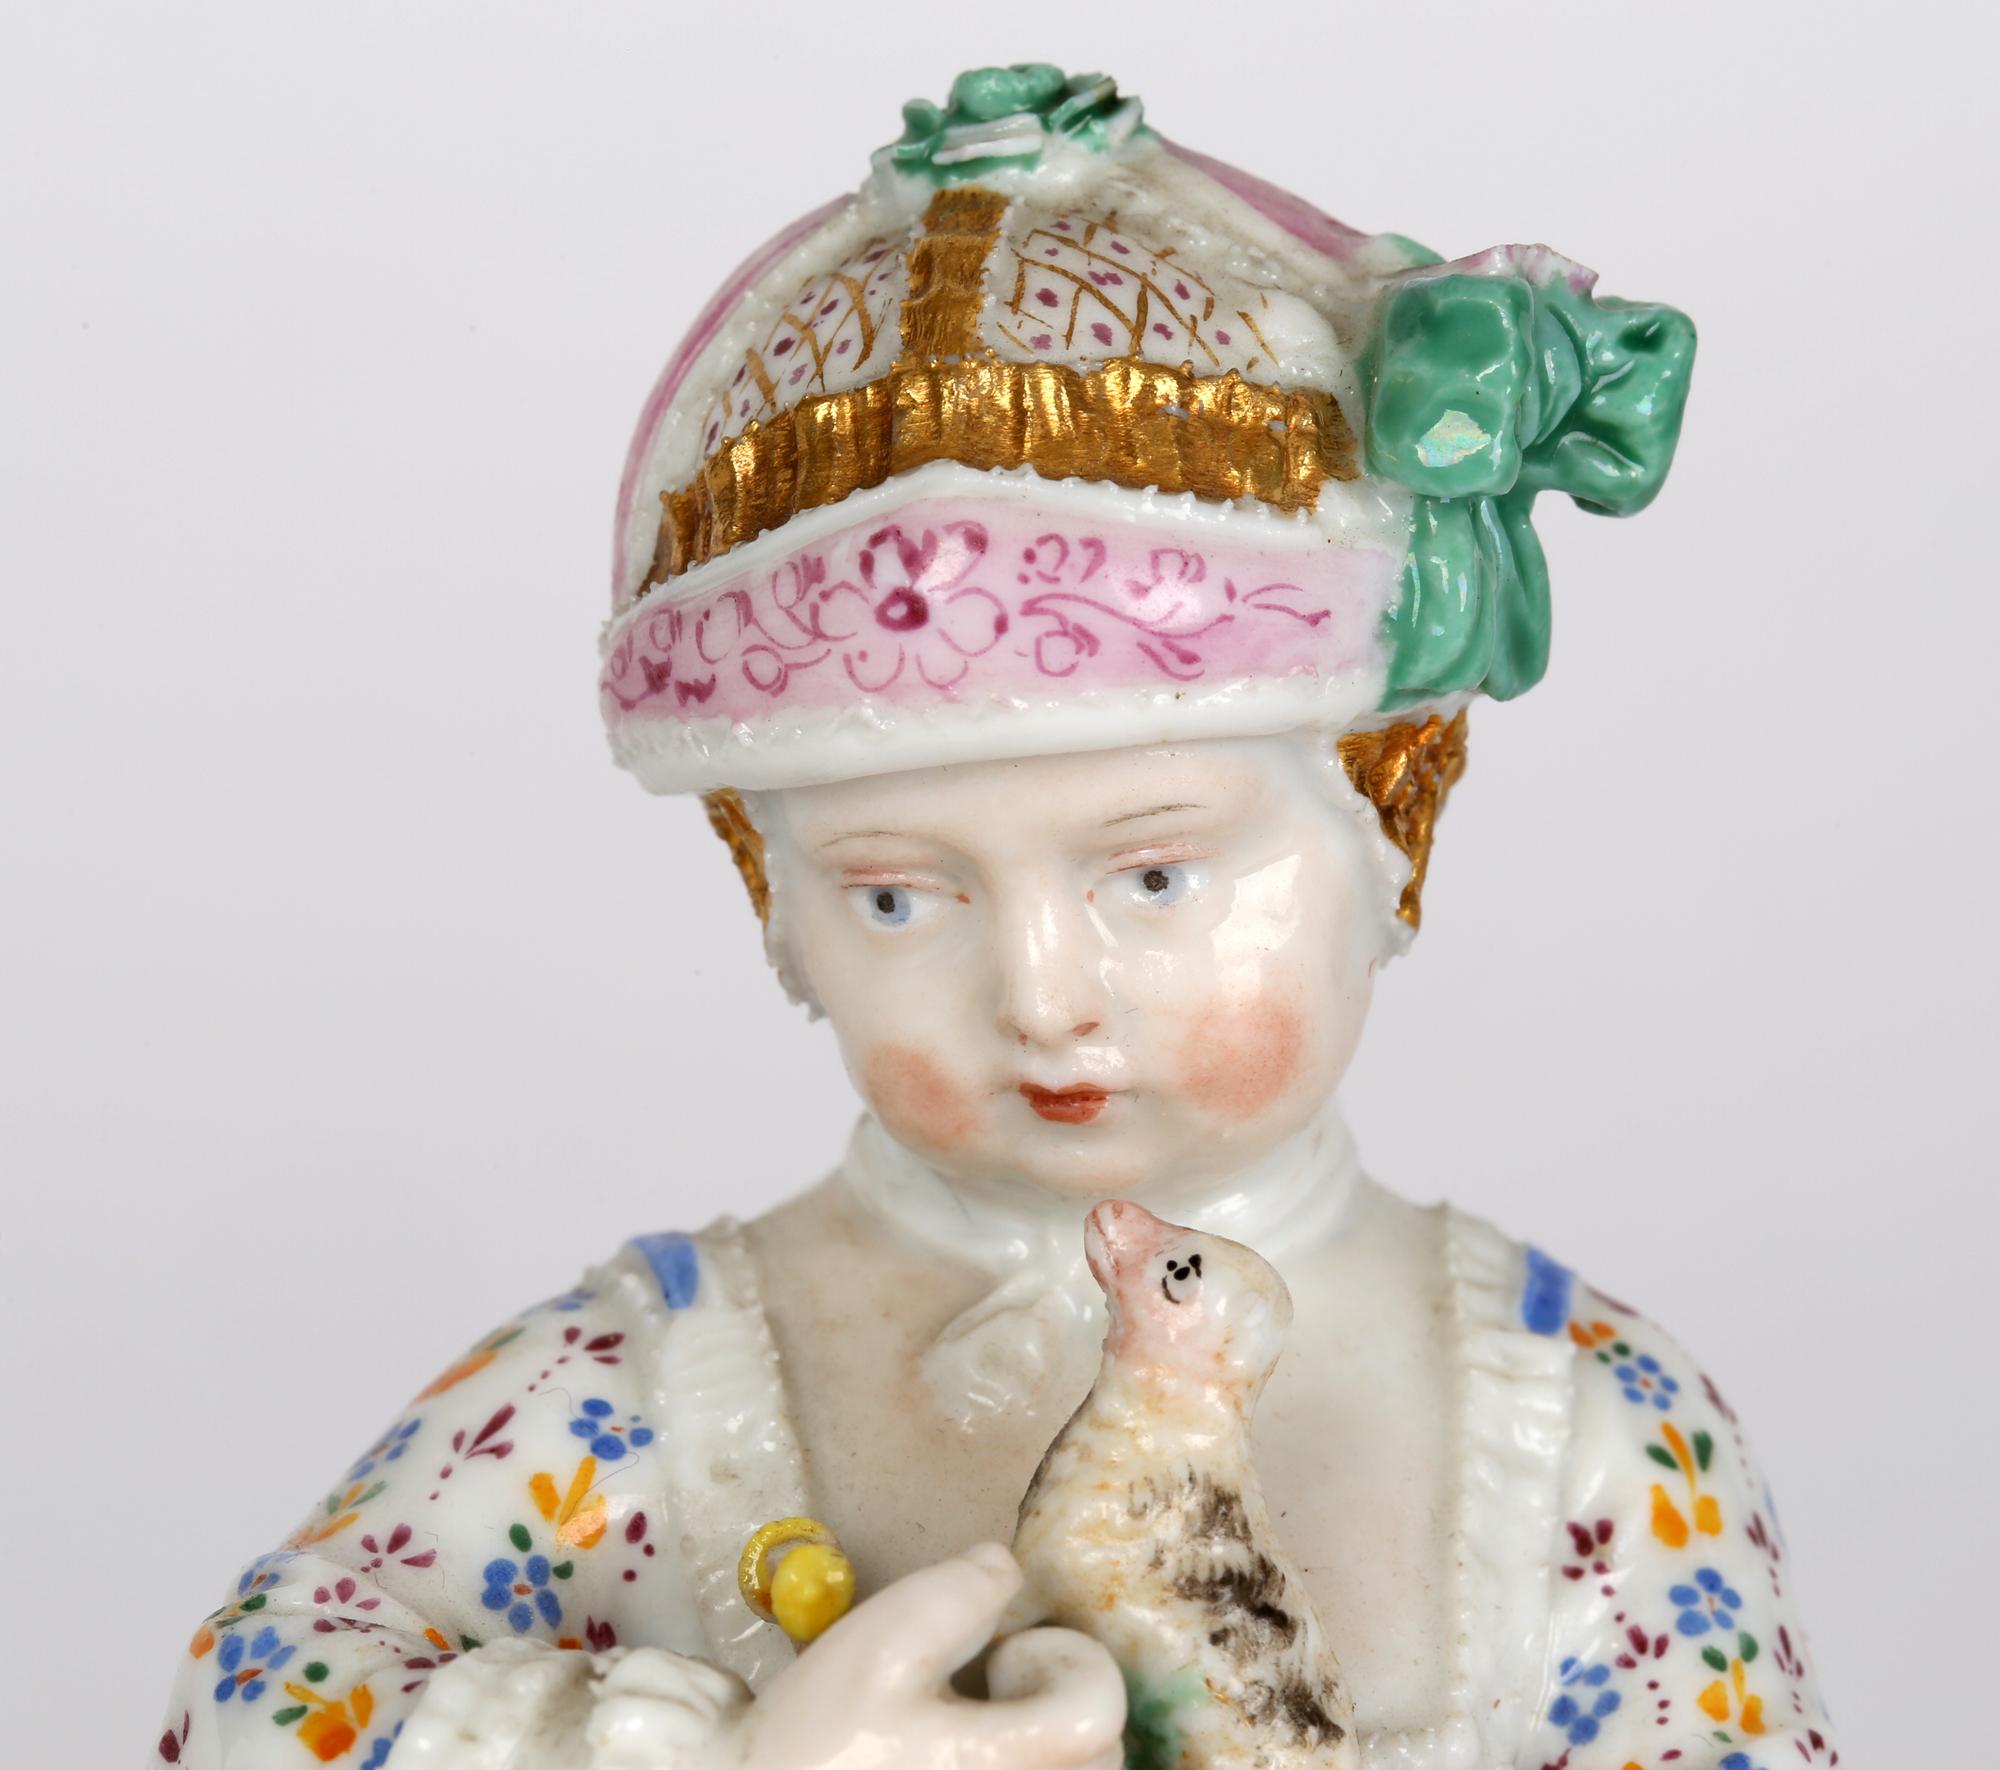 Neoclassical Meissen Porcelain Figurine of a Young Girl Holding a Pull Along Animal Toy